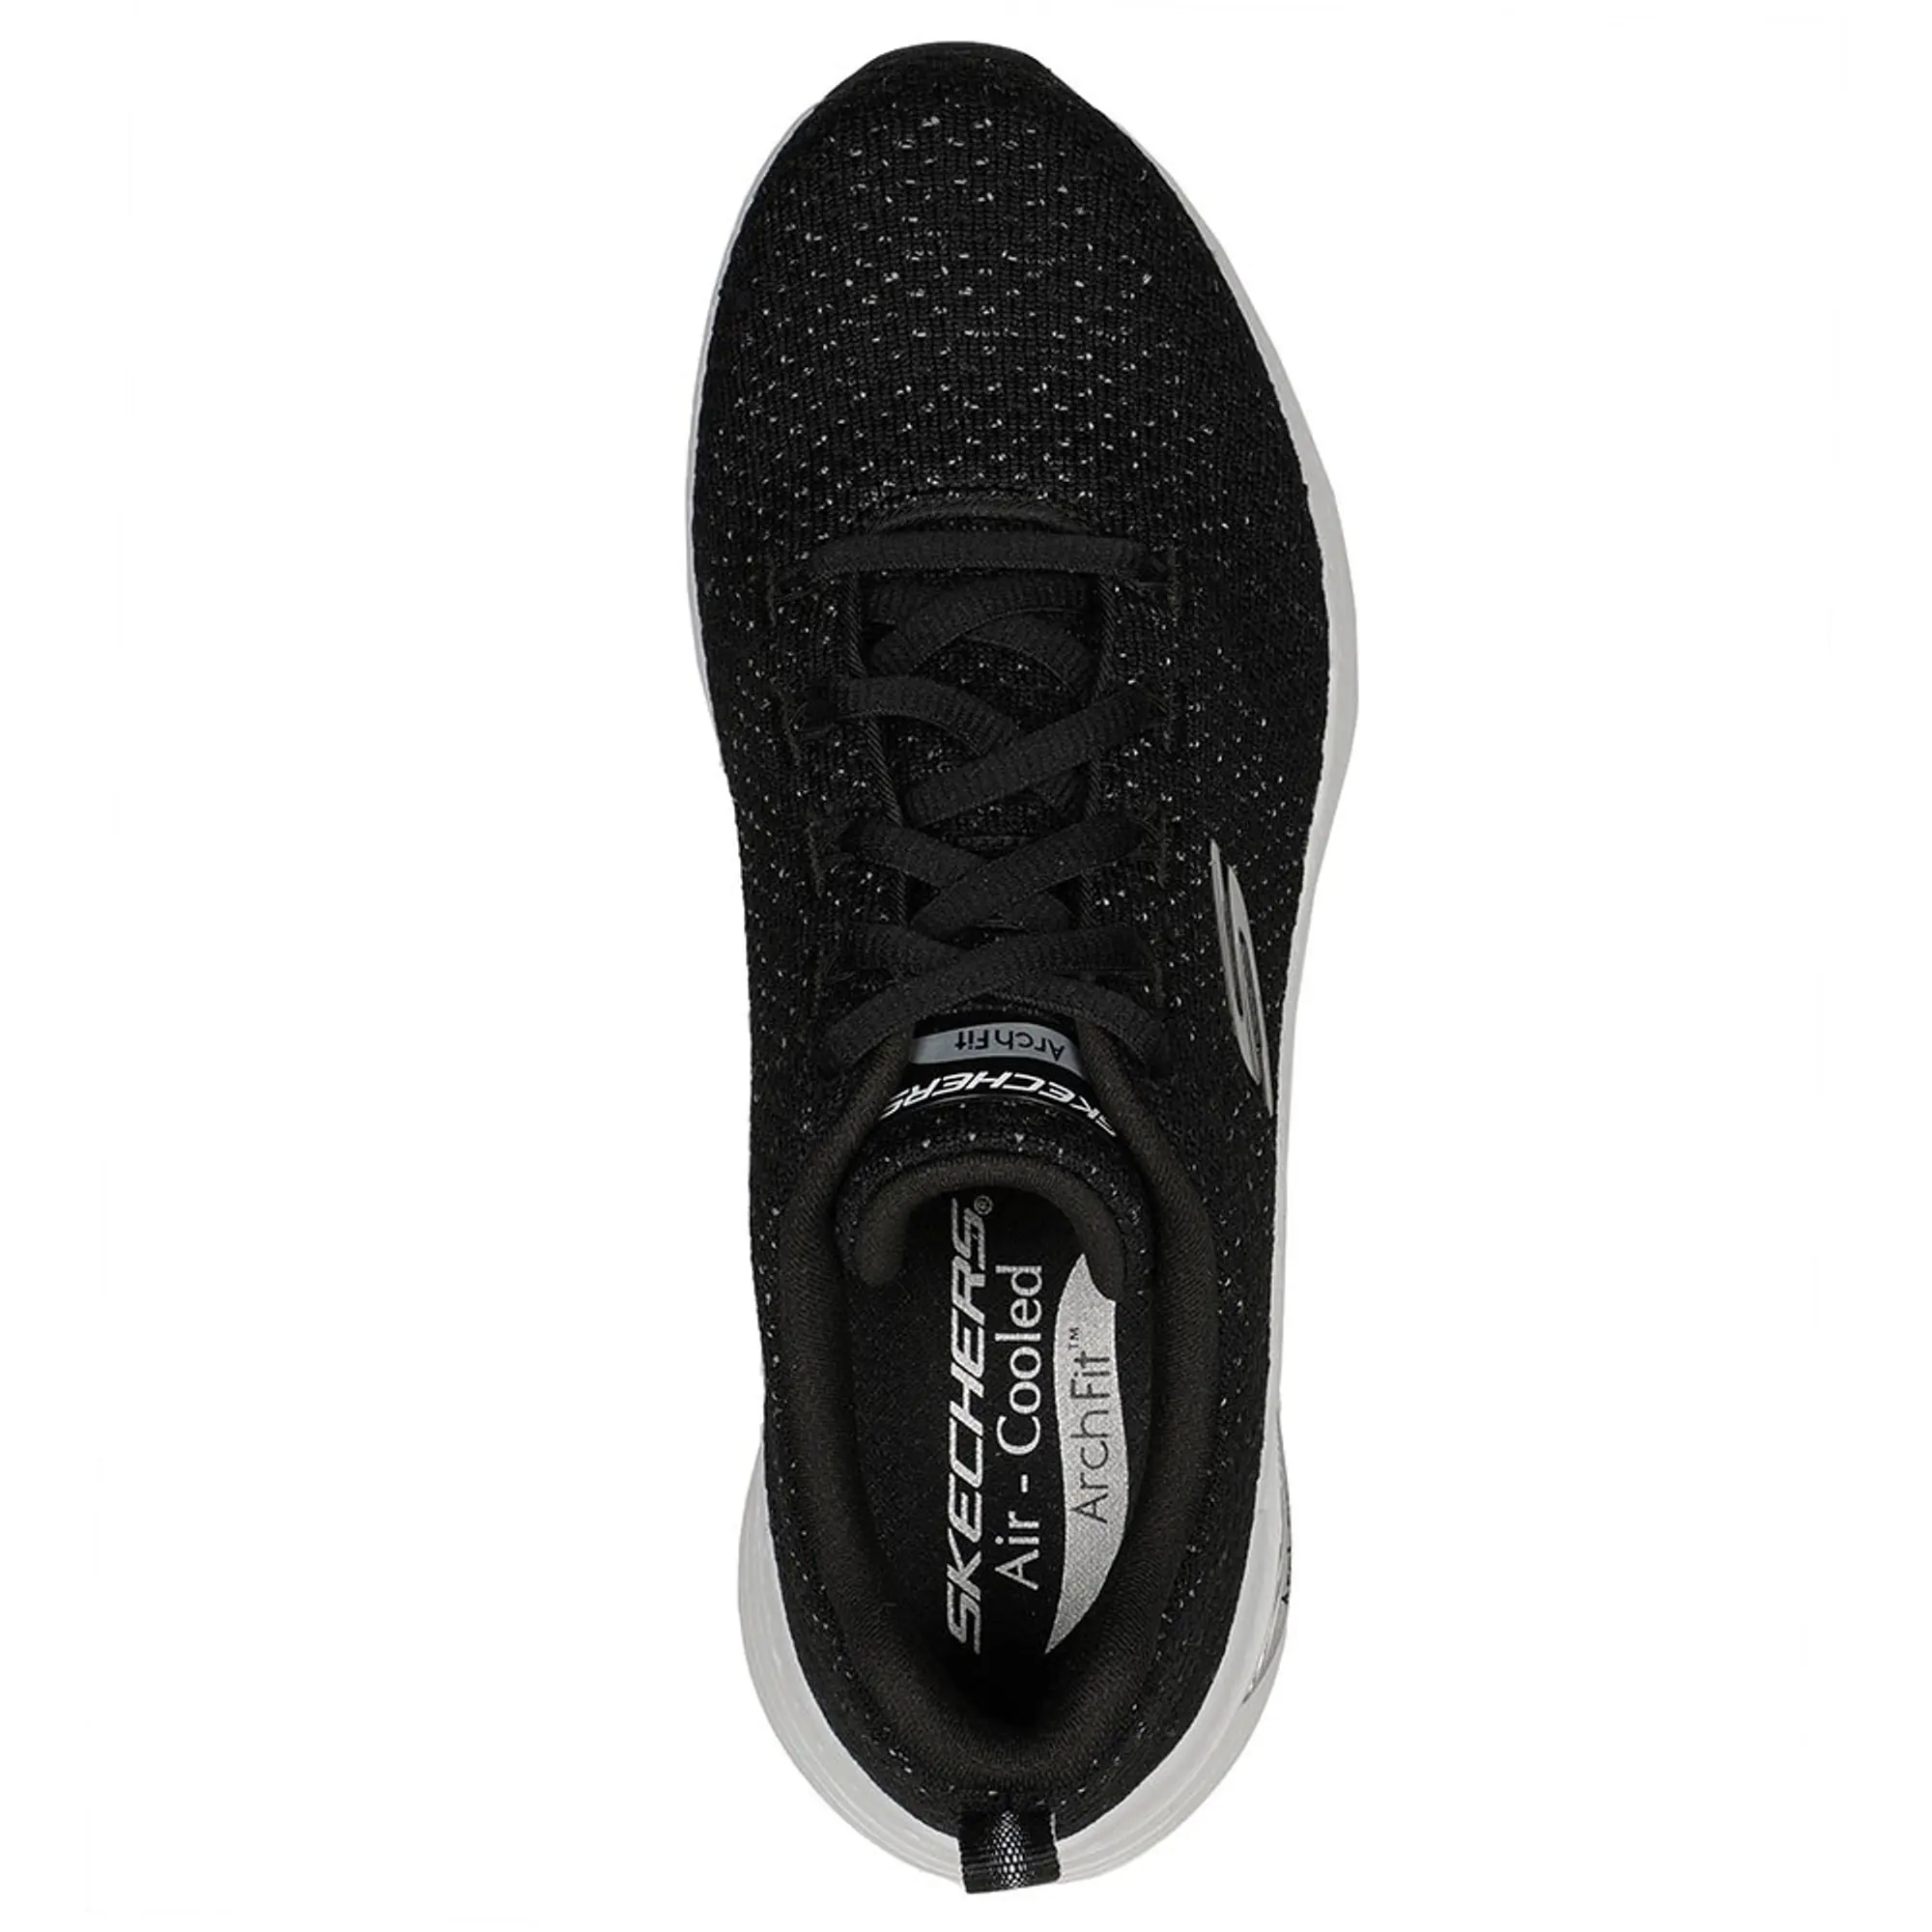 Skechers Skechers Arch Fit Glee For All Lace Up Trainers - Black & White, Black